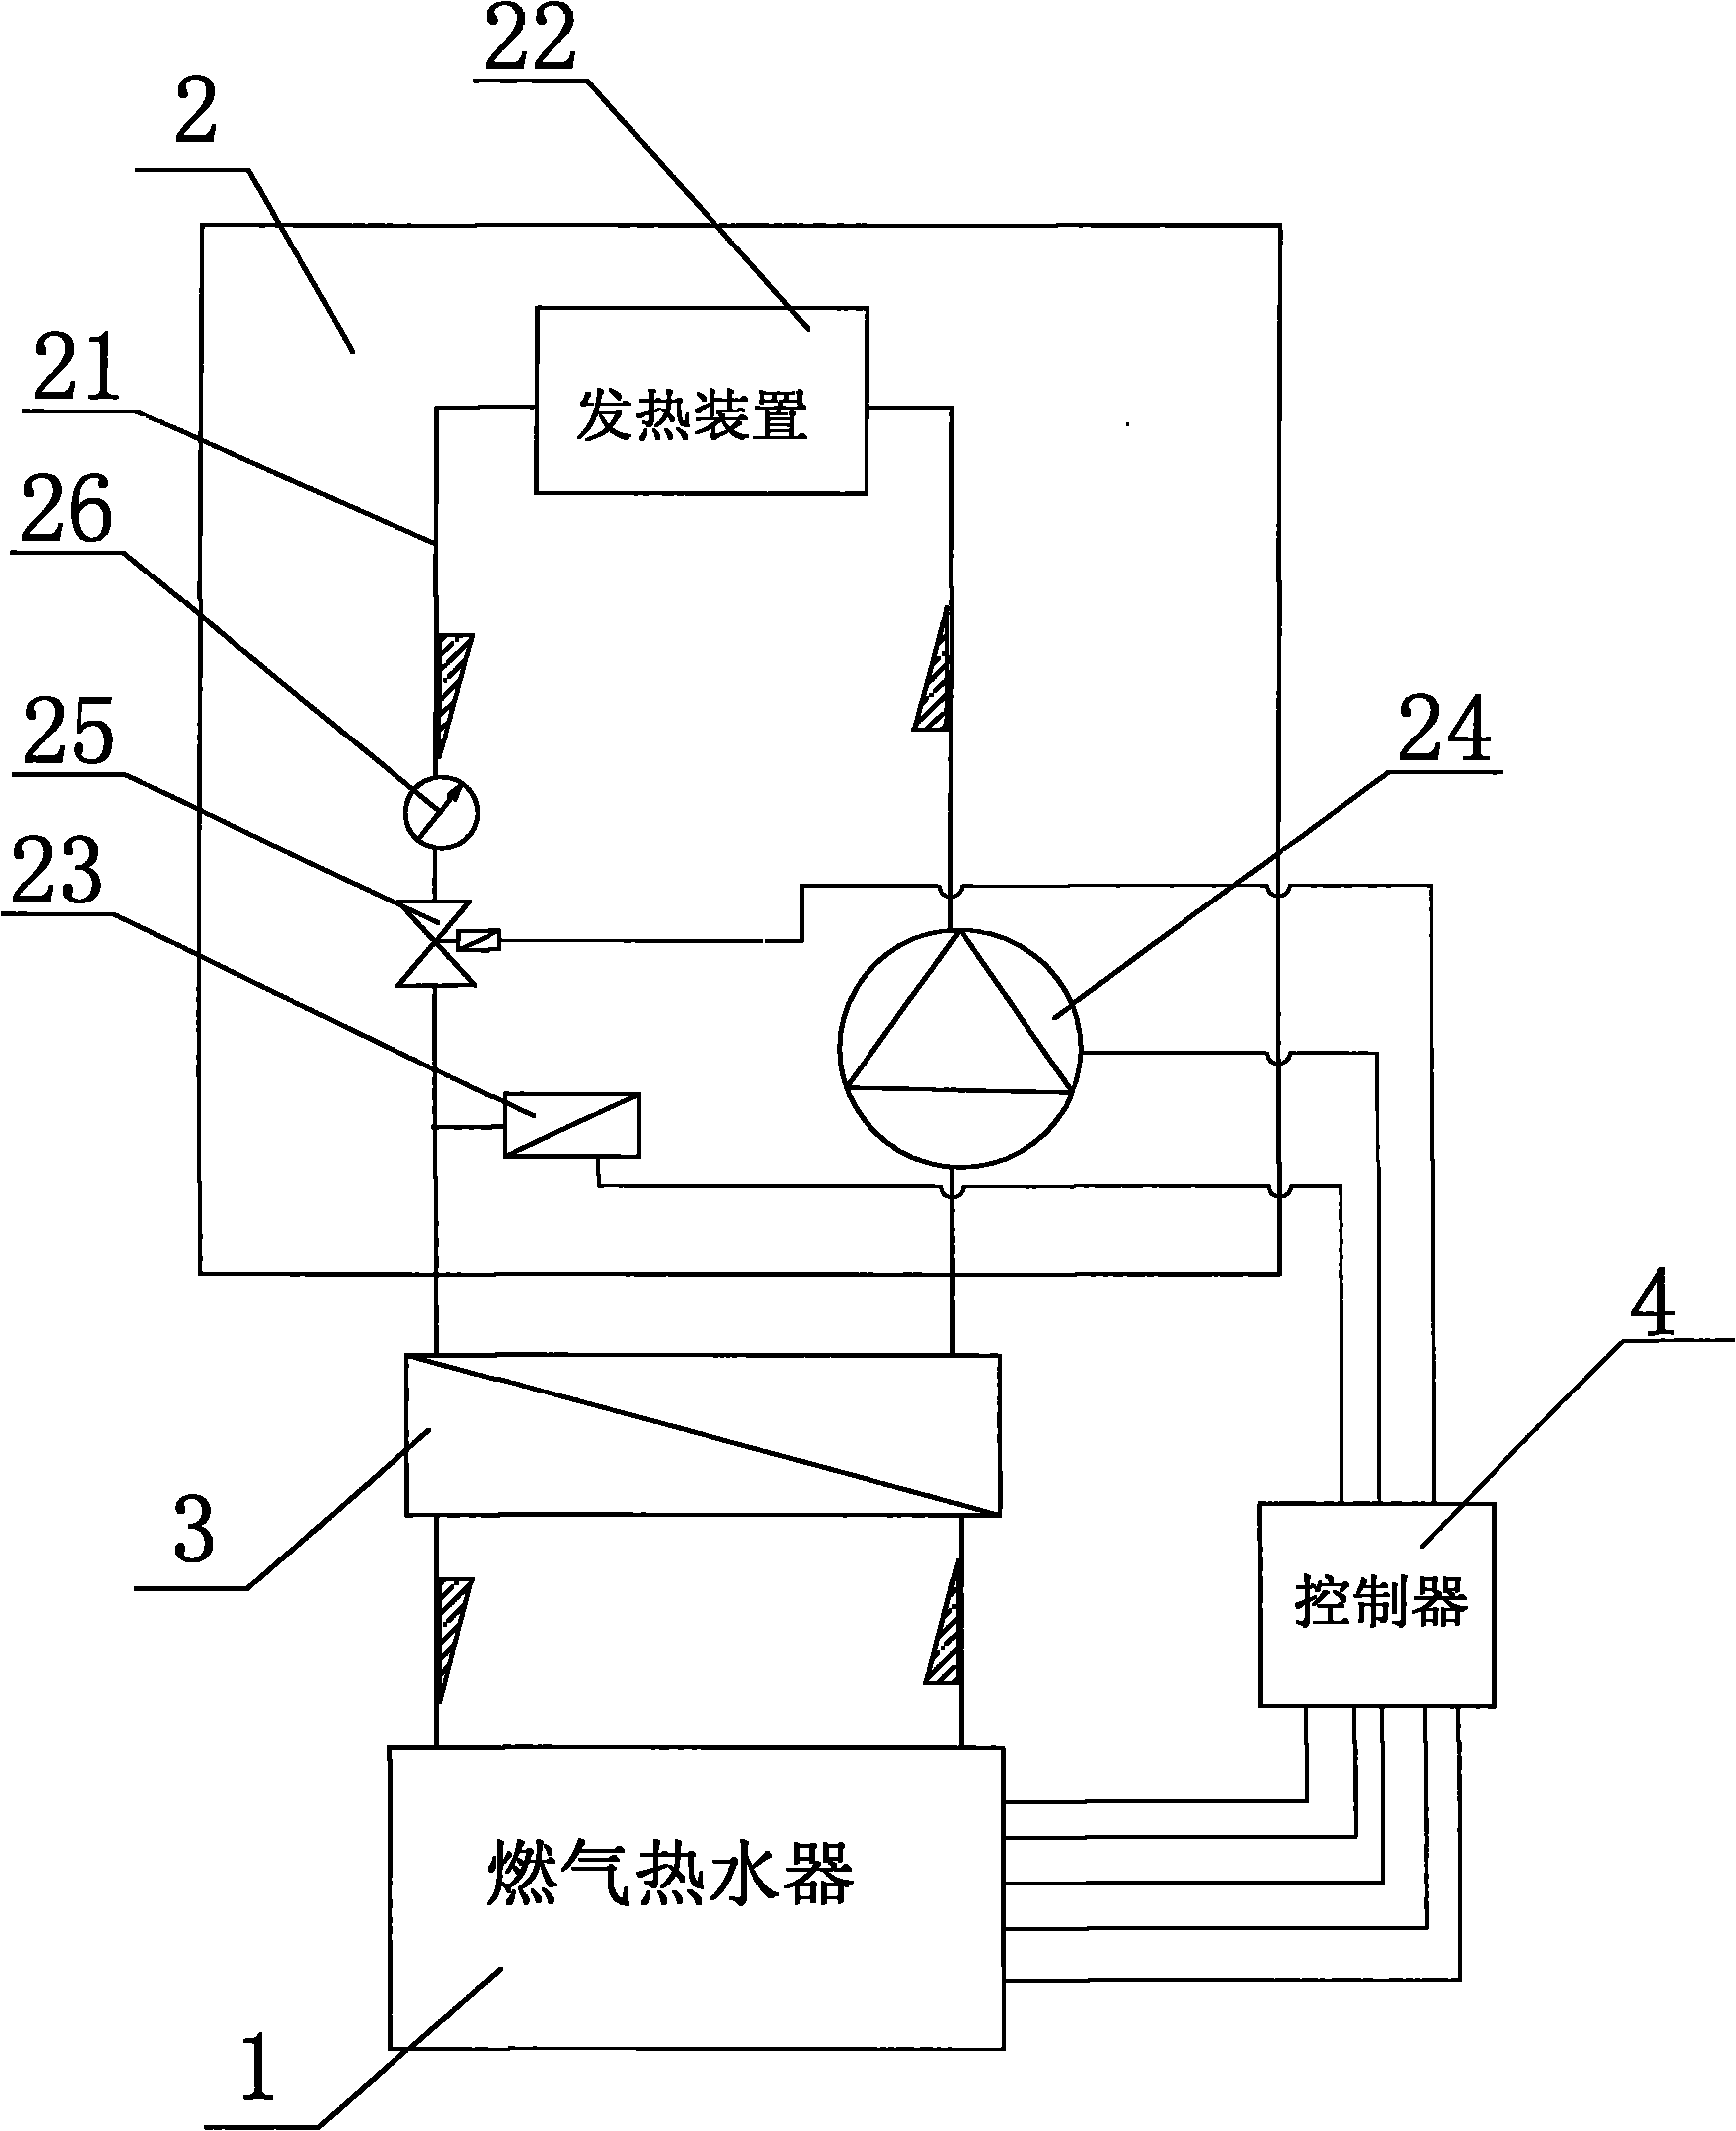 Dual-purpose water heating device capable of heating and heating water